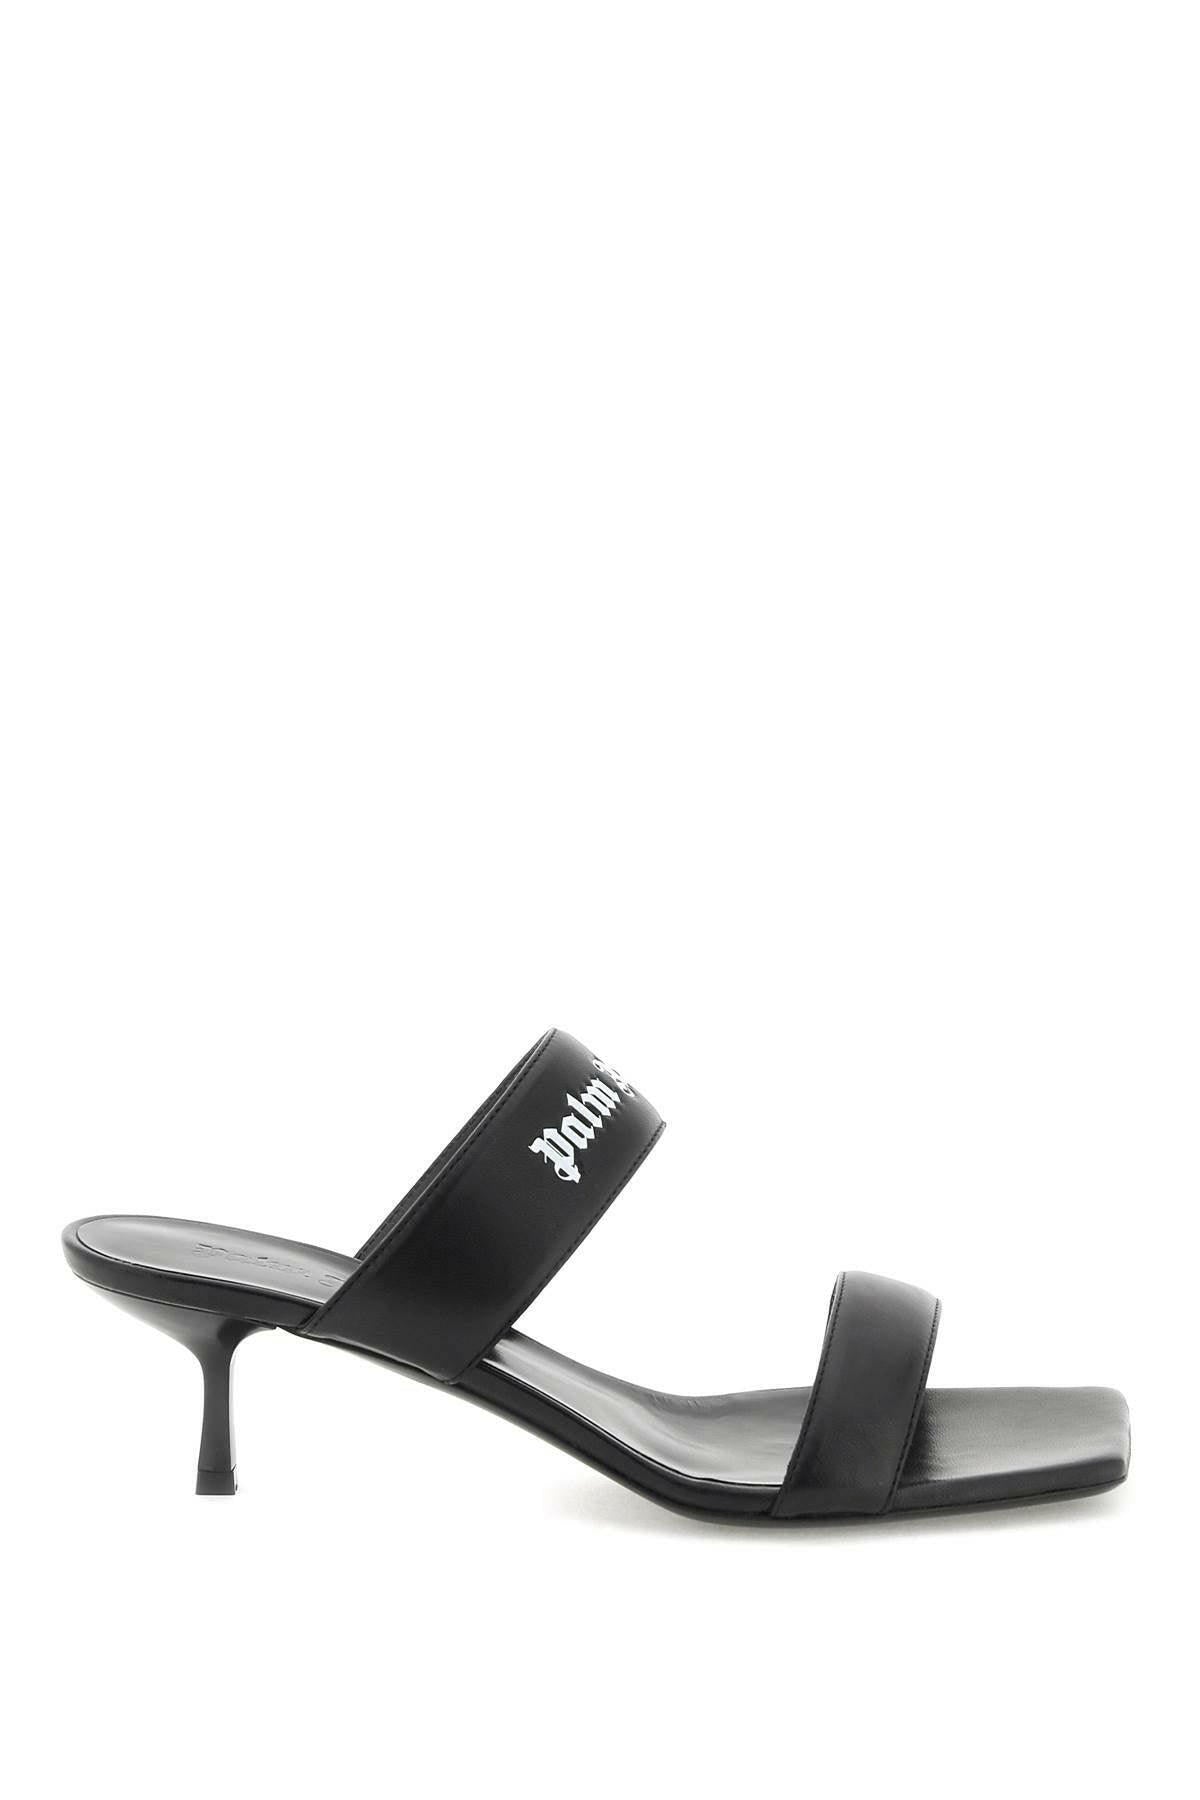 Palm Angels Leather Mules With Logo - JOHN JULIA